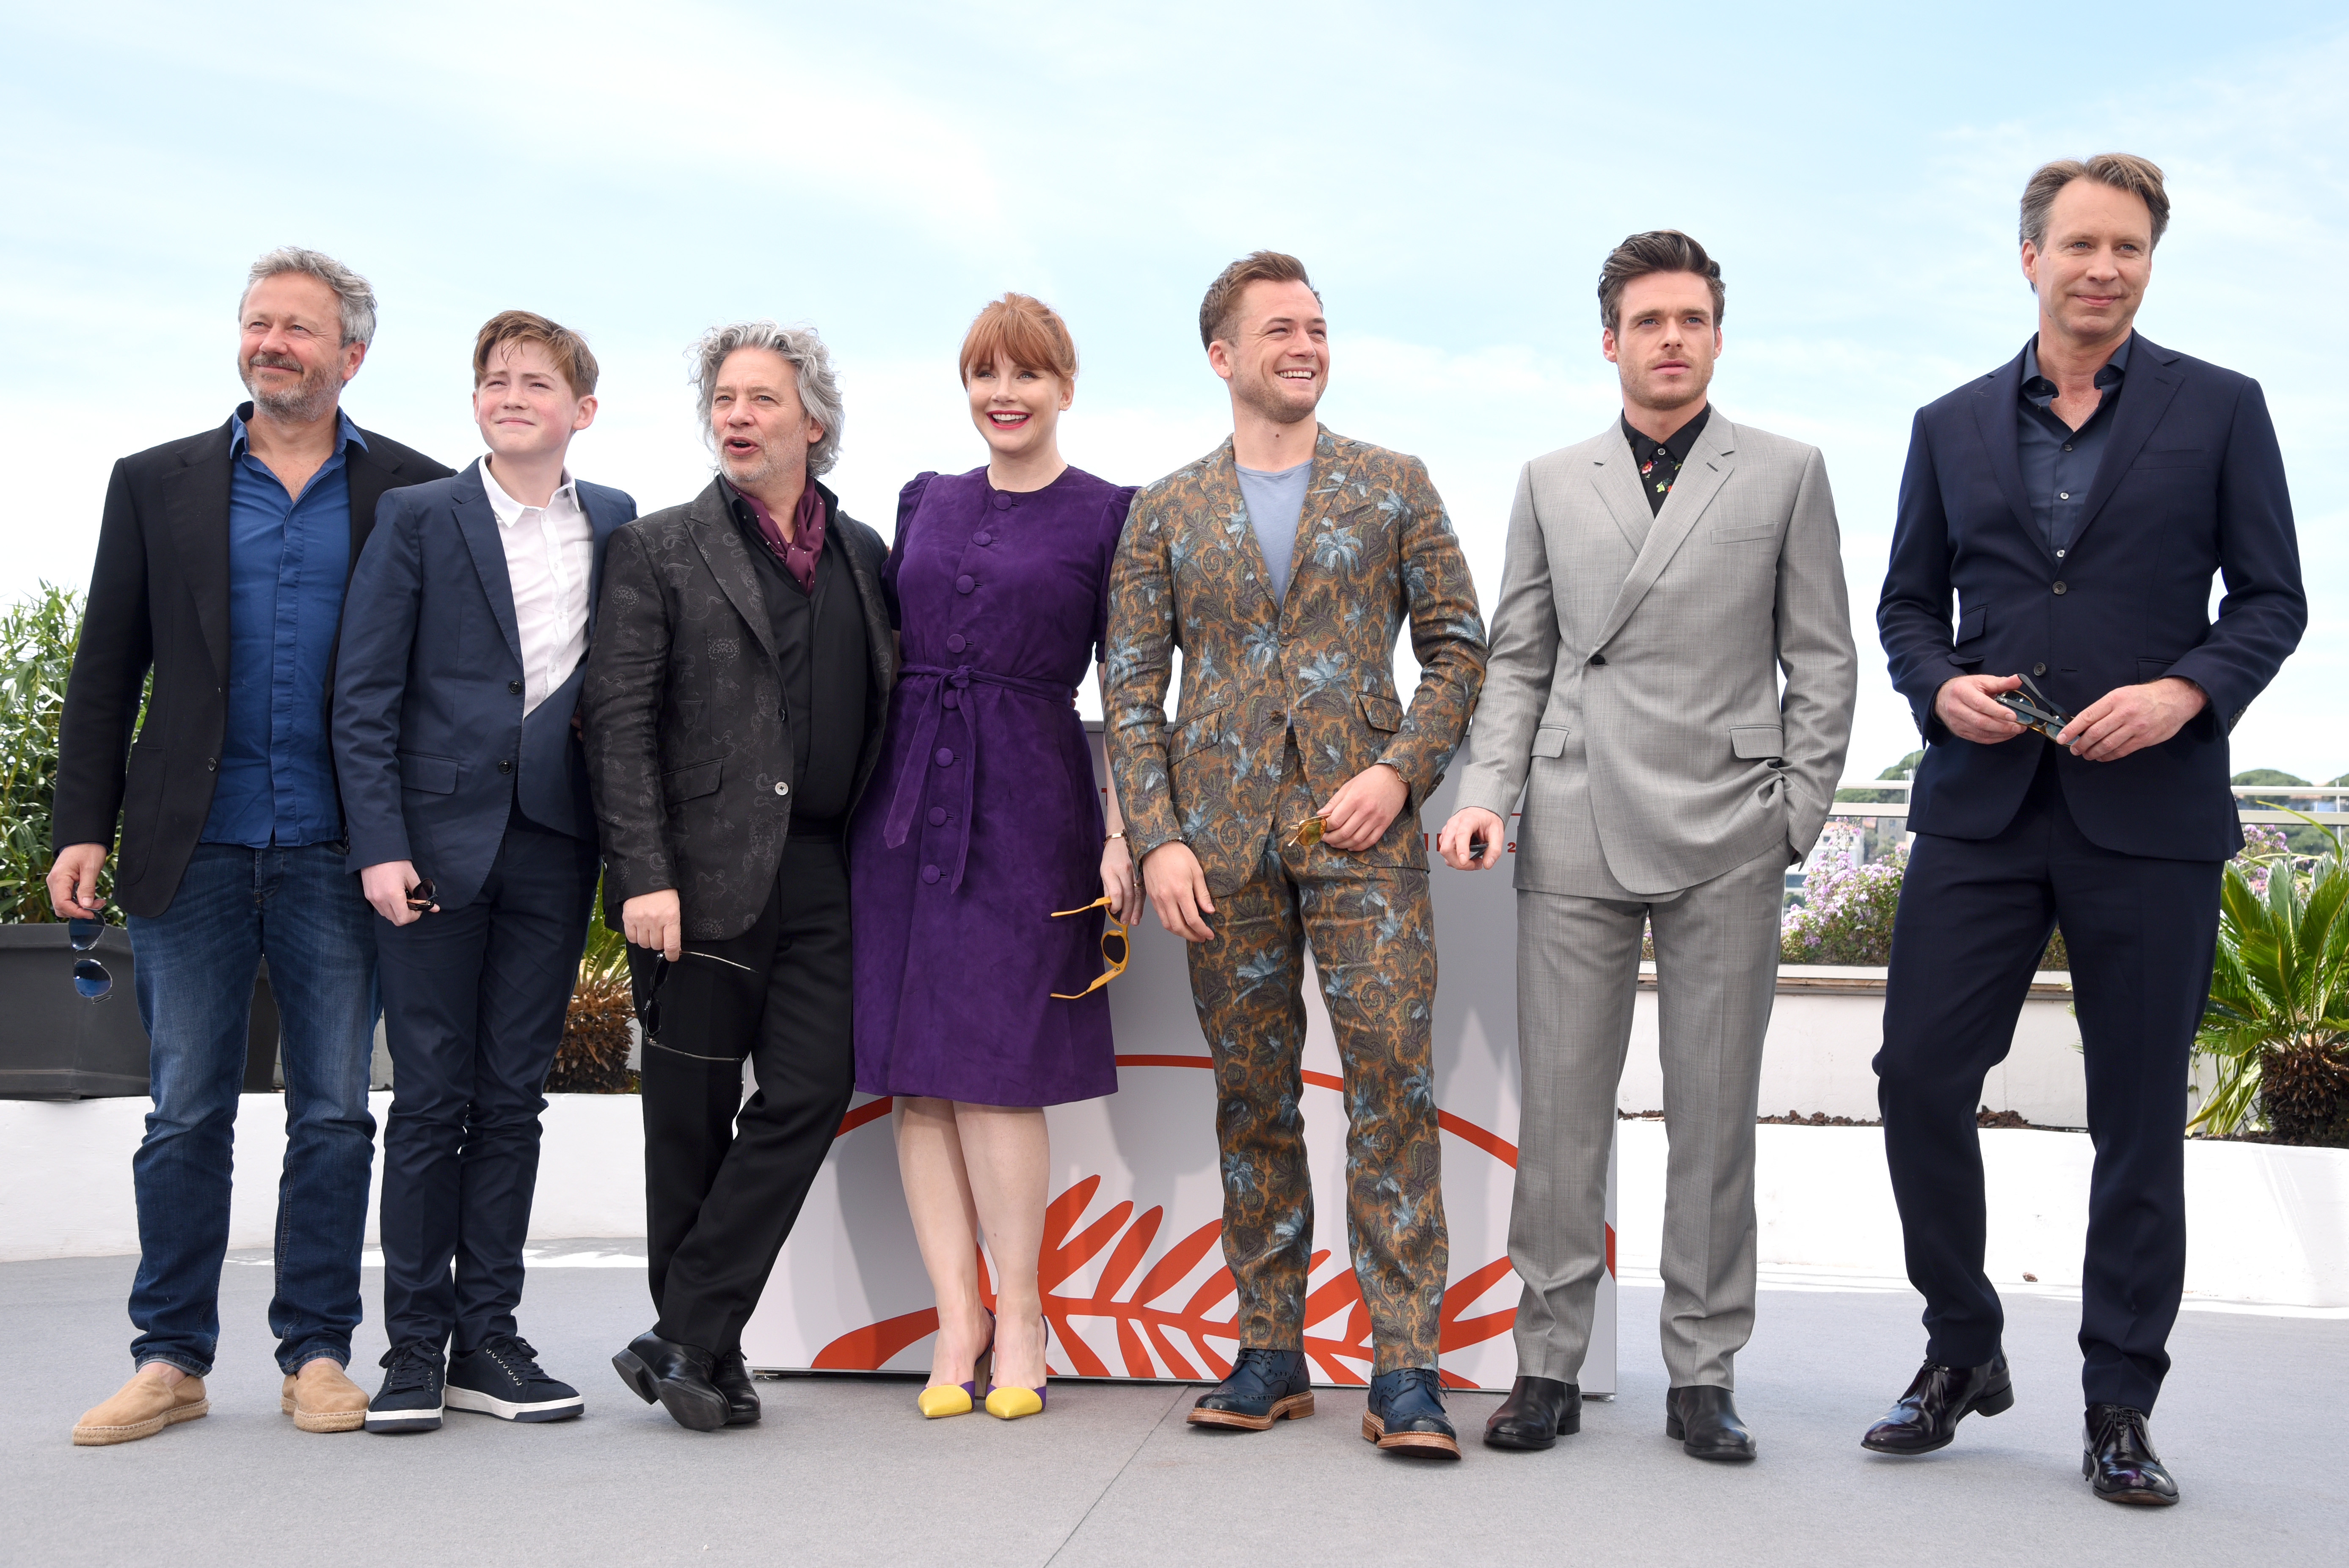 CANNES, FRANCE  - MAY 16:  (L-R) Adam Bohling, Kit Connor, Dexter Fletcher, Bryce Dallas Howard, Taron Egerton, Richard Madden, and Giles Martin attend the "Rocketman" Photocall during the 72nd annual Cannes Film Festival on May 16, 2019 in Cannes, France. (Photo by Serge Arnal/Paramount)